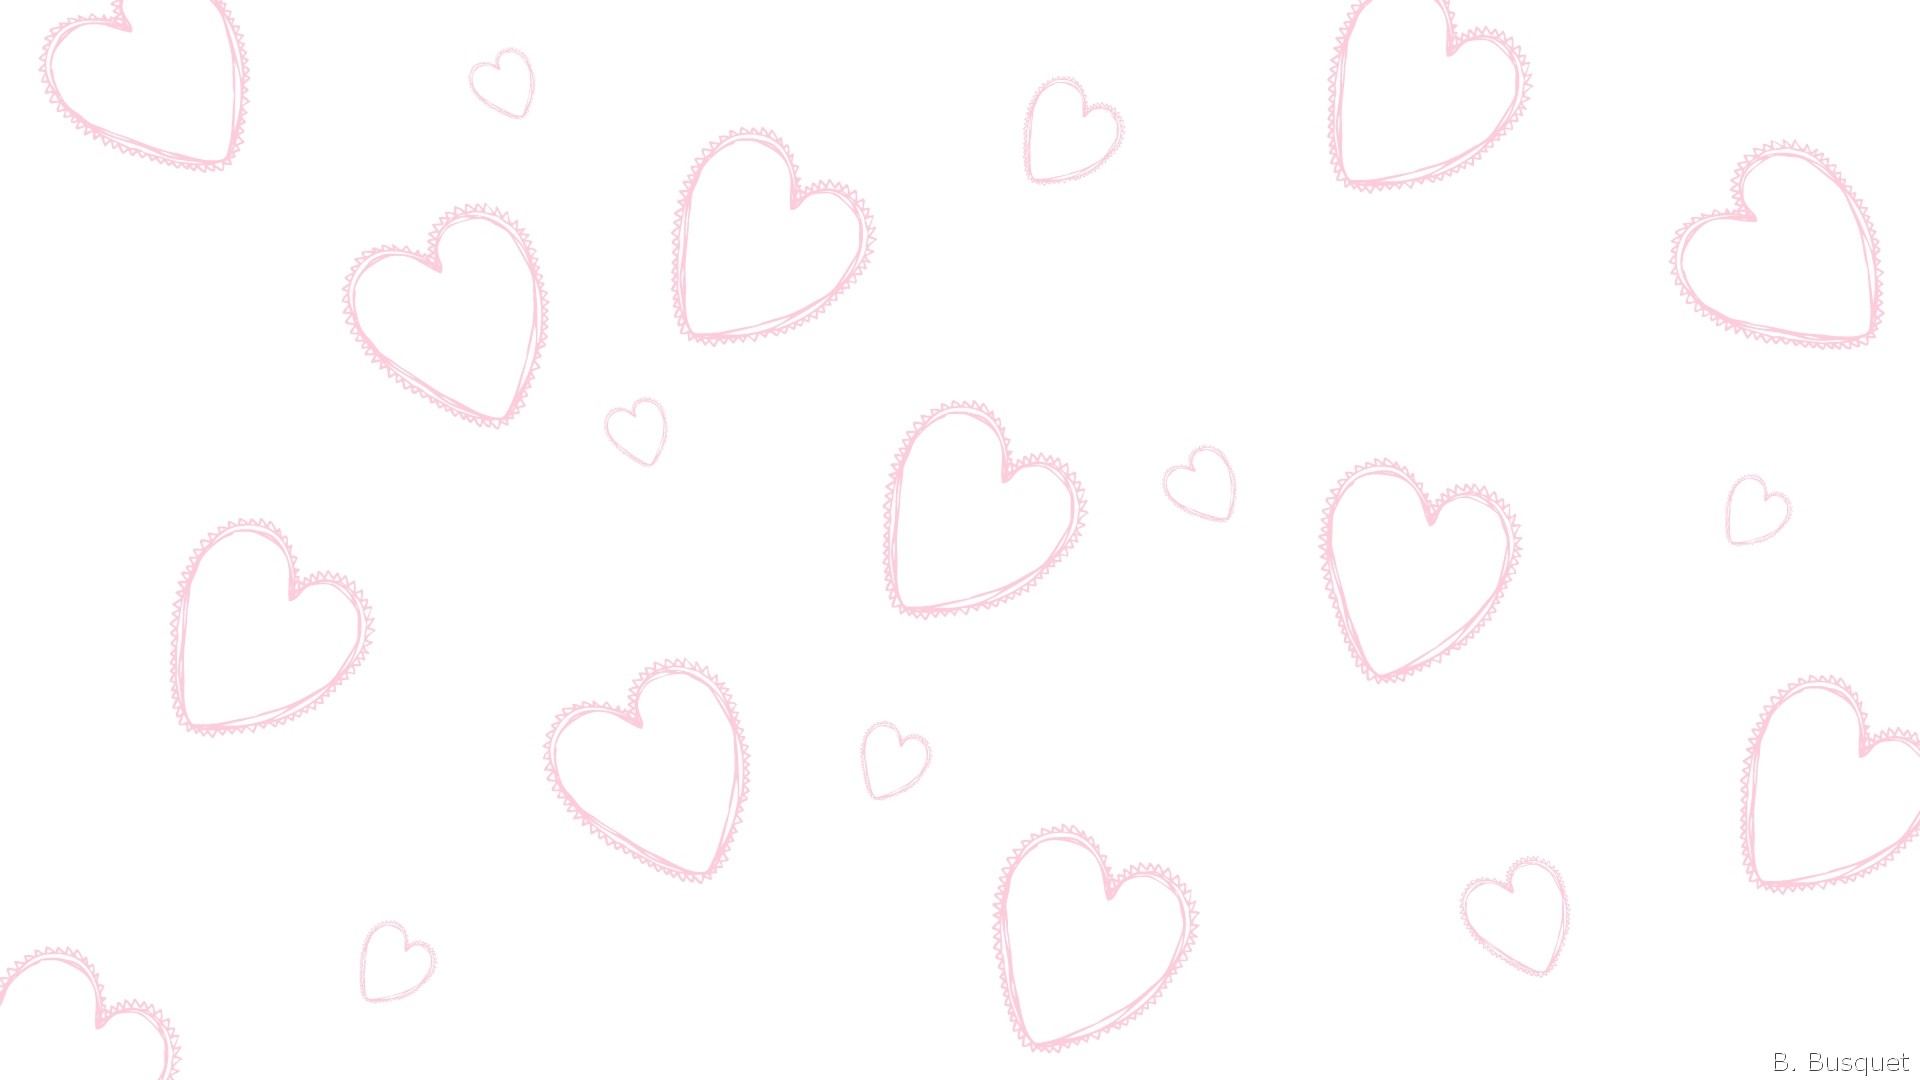 Pink And White Heart Wallpaper